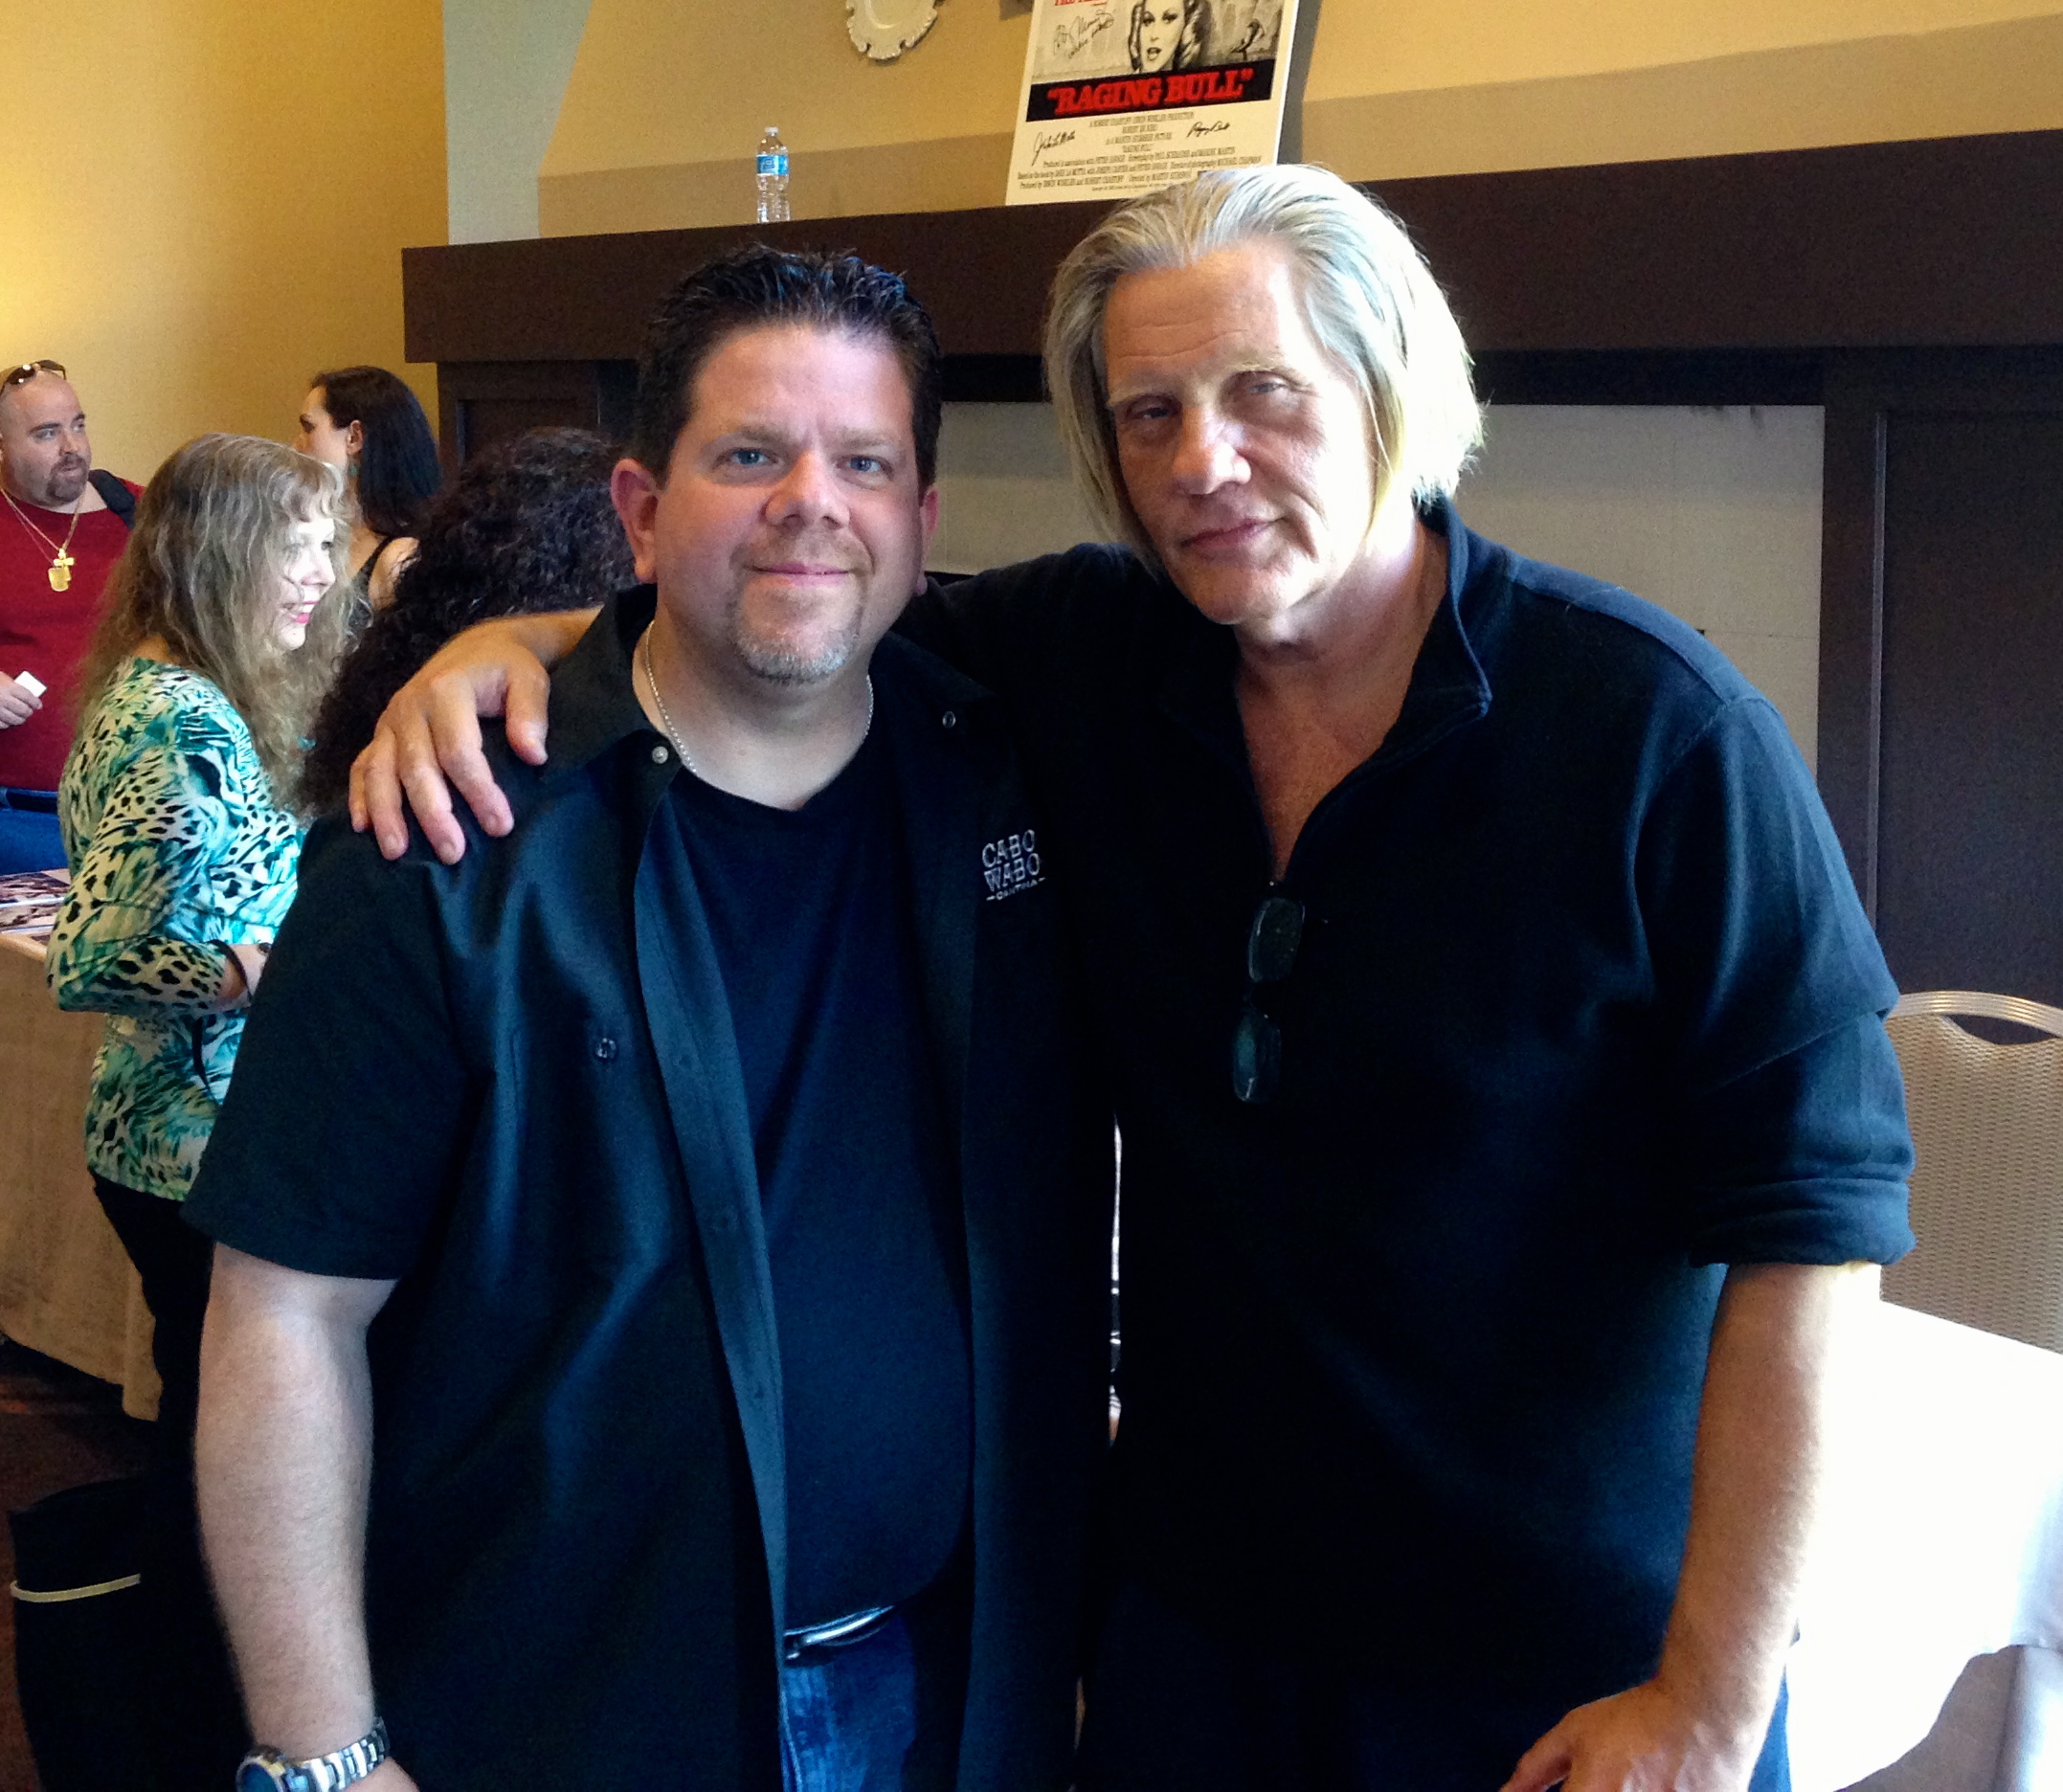 With the great character actor, William Forsythe in NJ